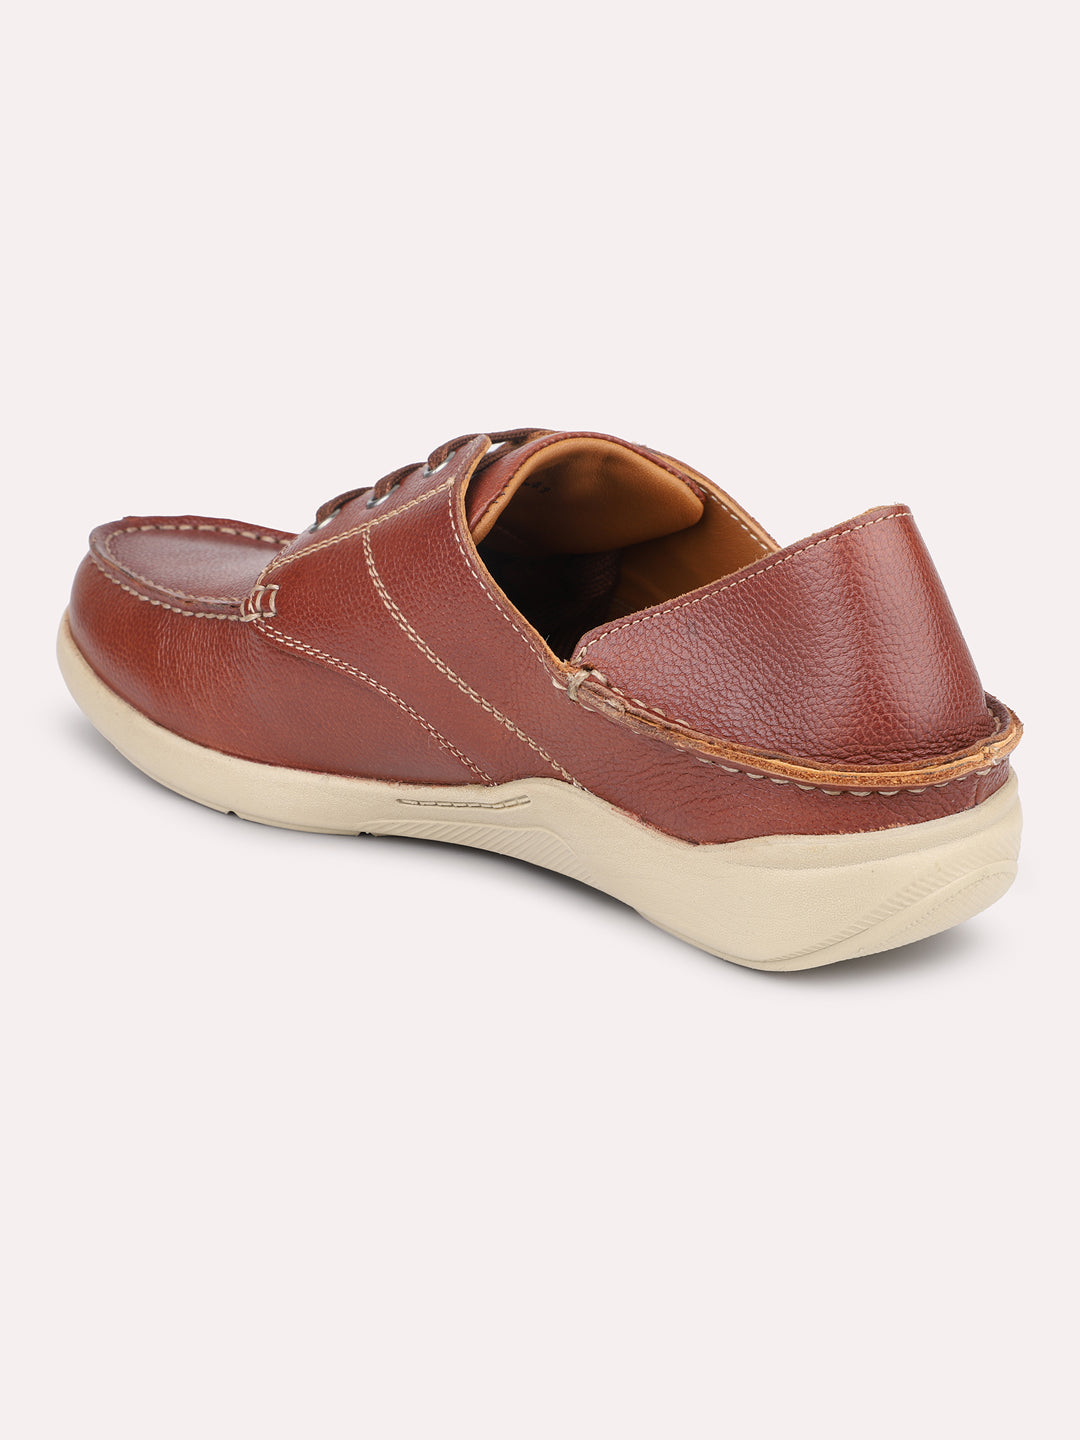 Atesber Tan Casual Lace-Up Shoes For Men